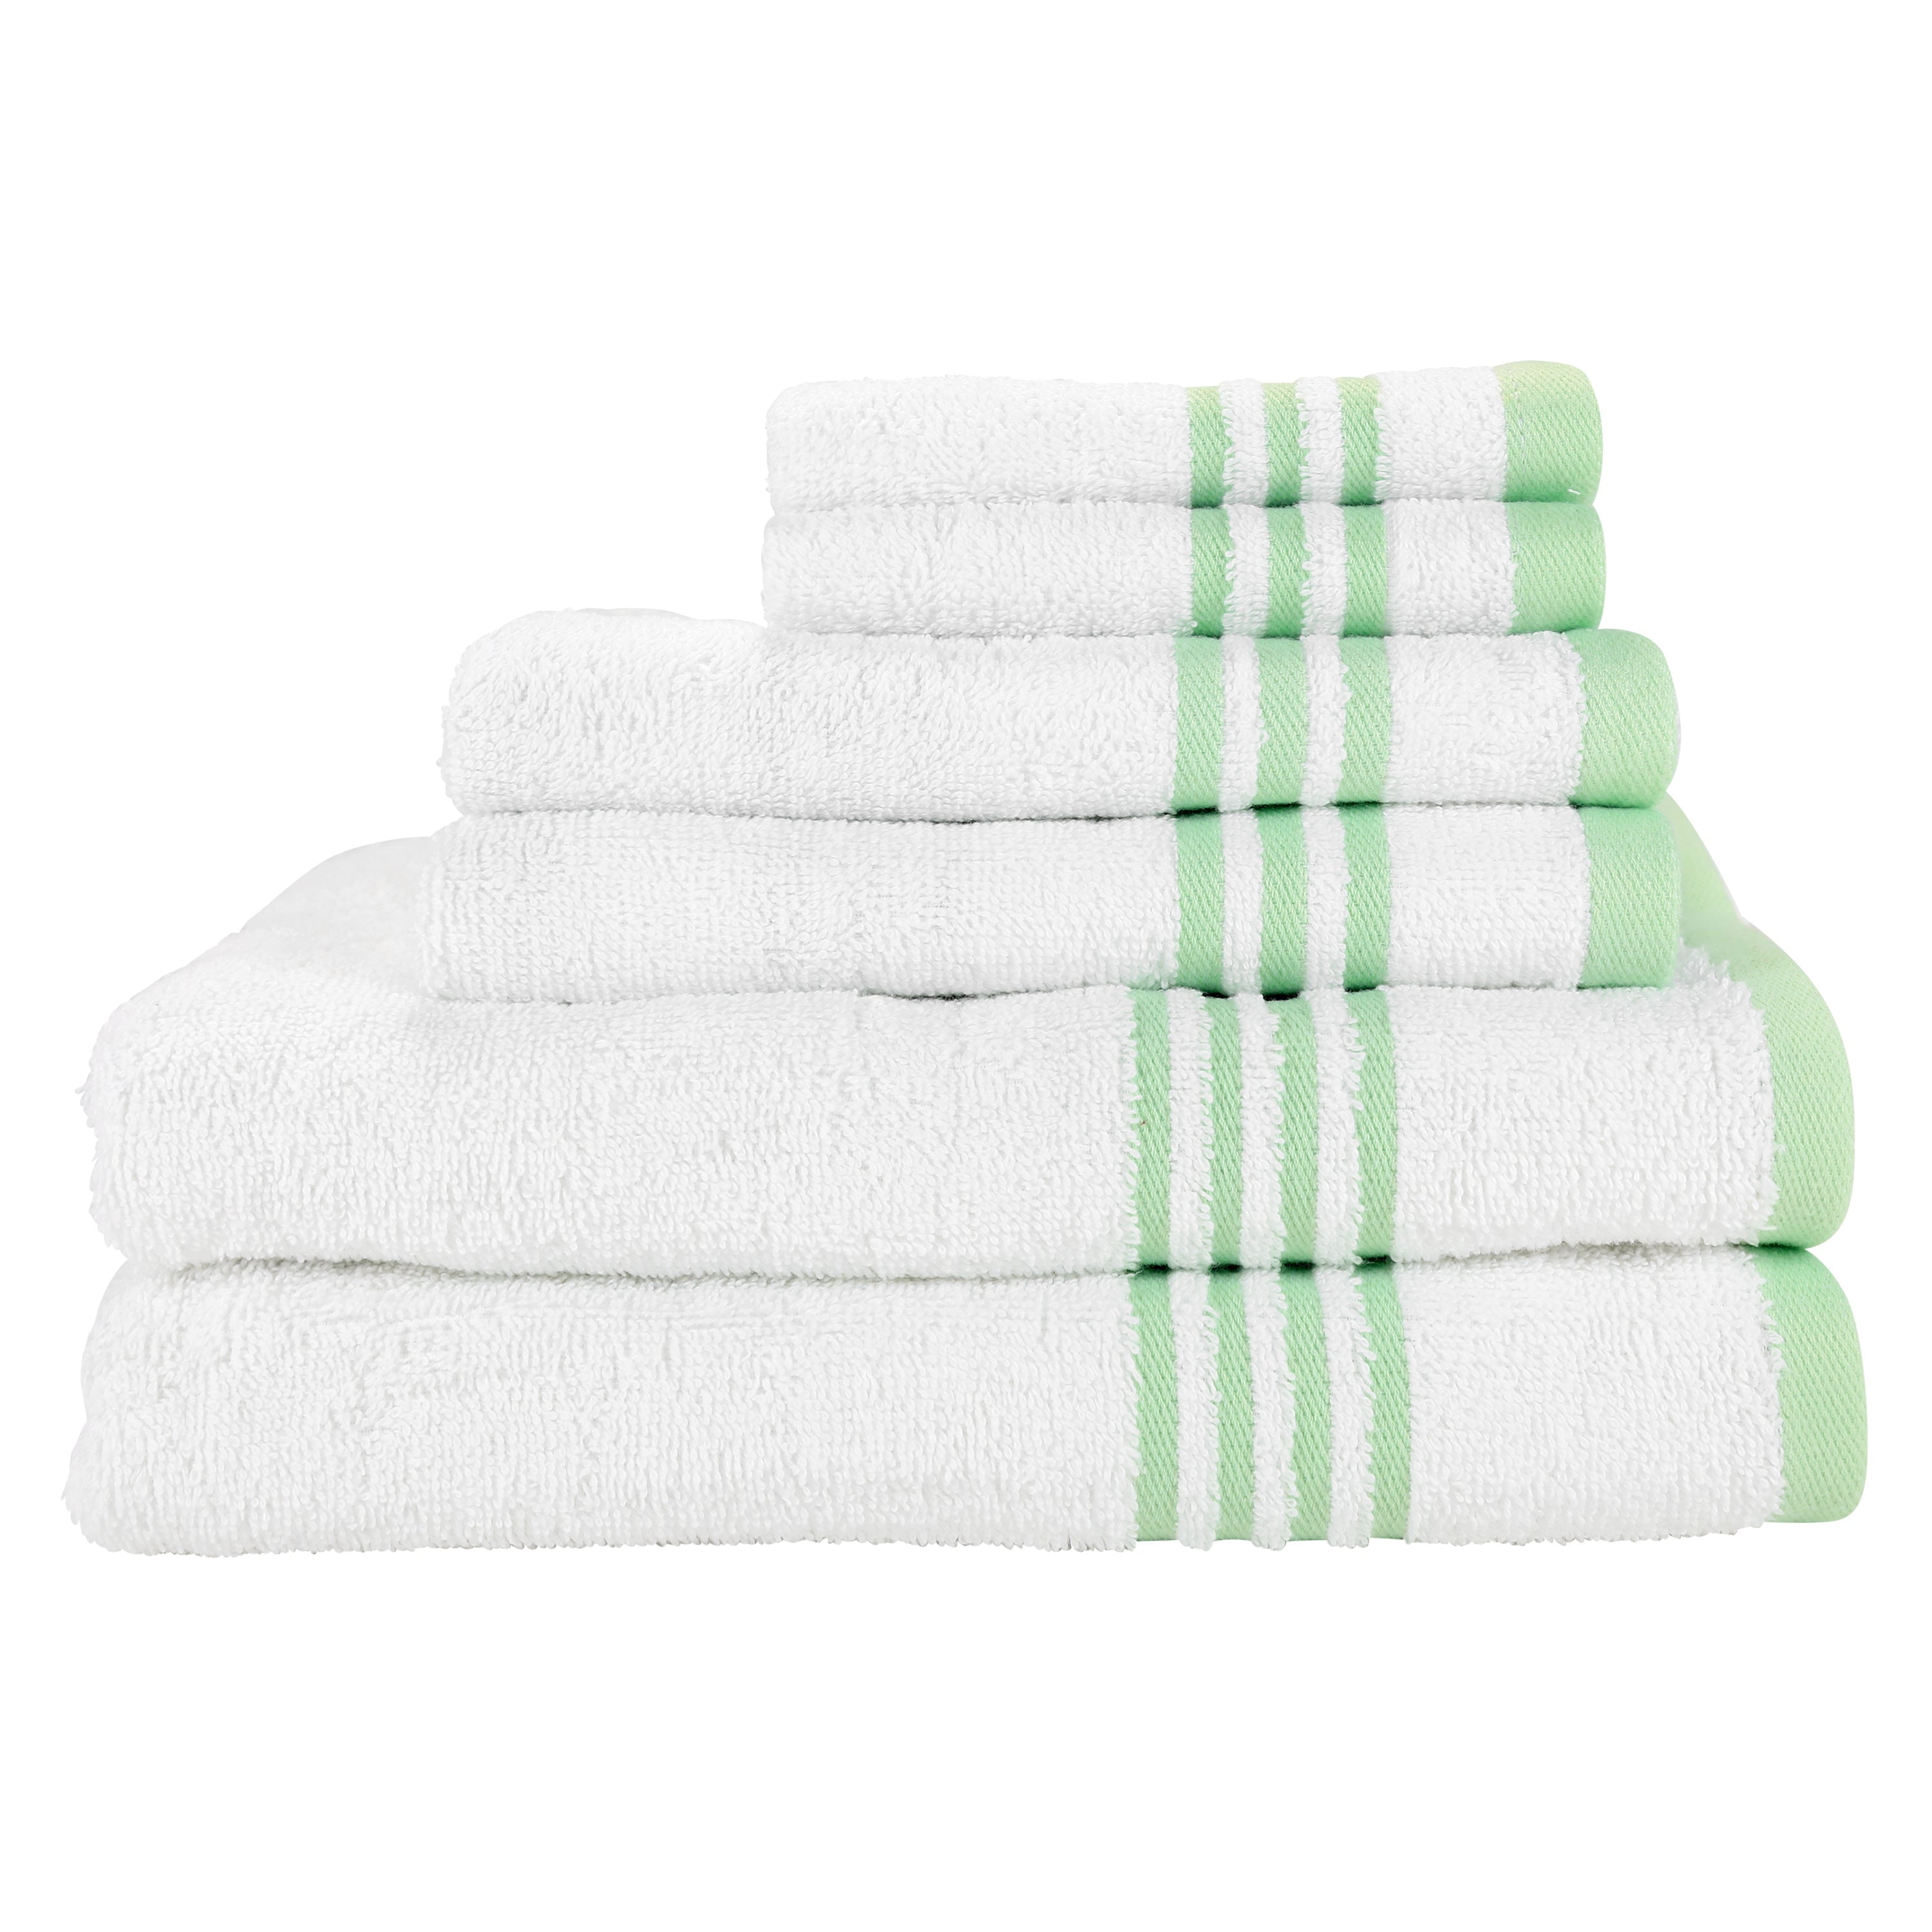 Arkwright True Color Bath Towels (6-Pack), 25x52 in., Ring Spun Cotton, Beige, Size: 25 x 52